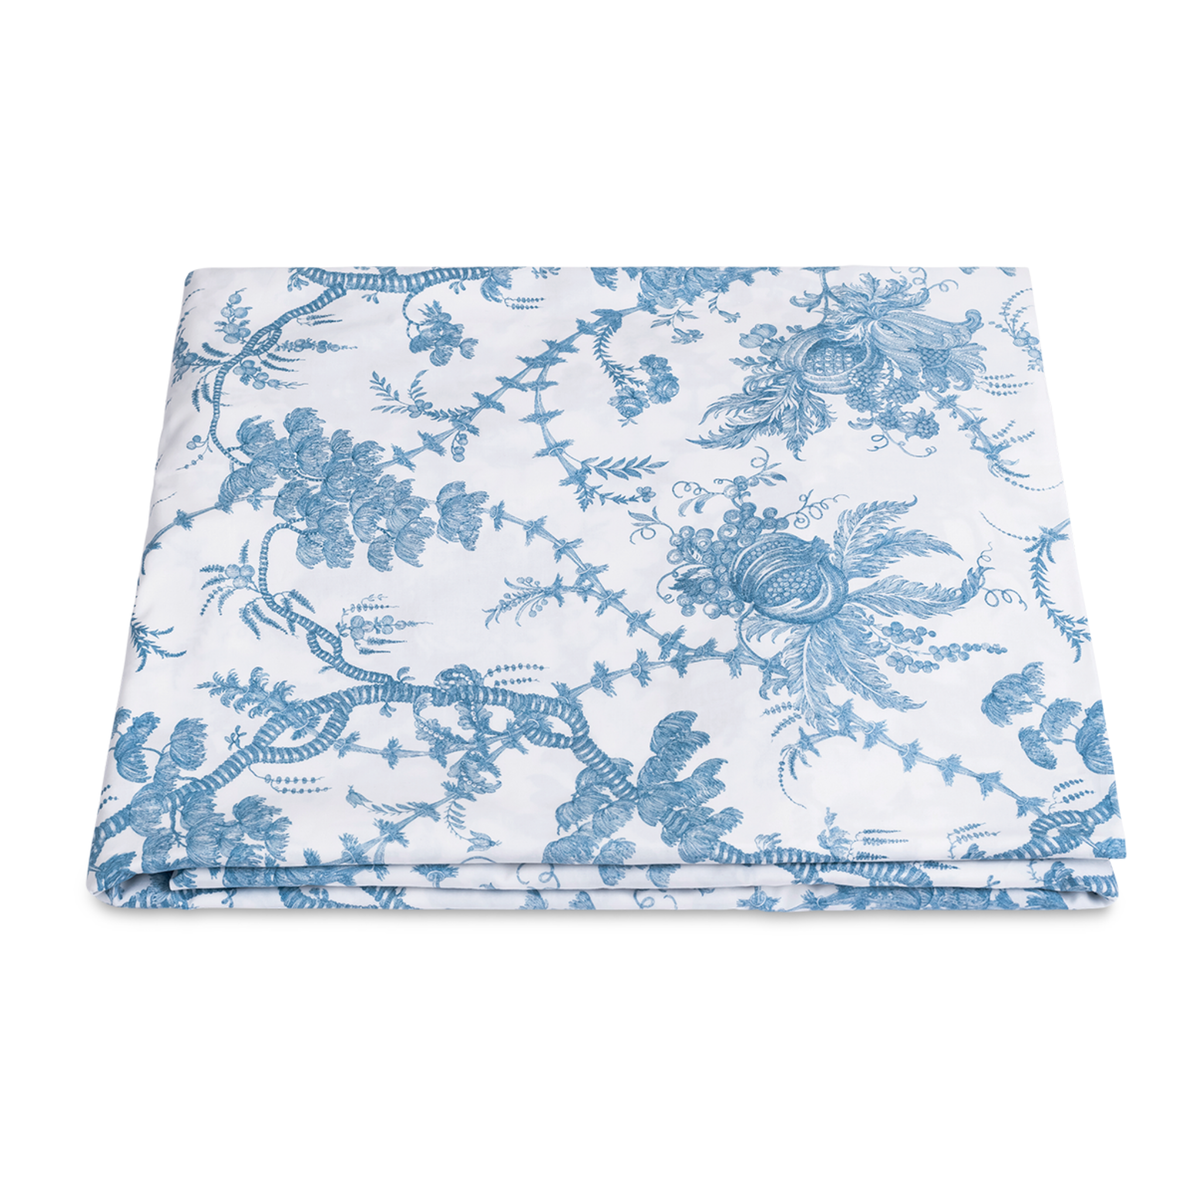 Folded Fitted Sheet of Matouk Schumacher San Cristobal Bedding in Sky Color